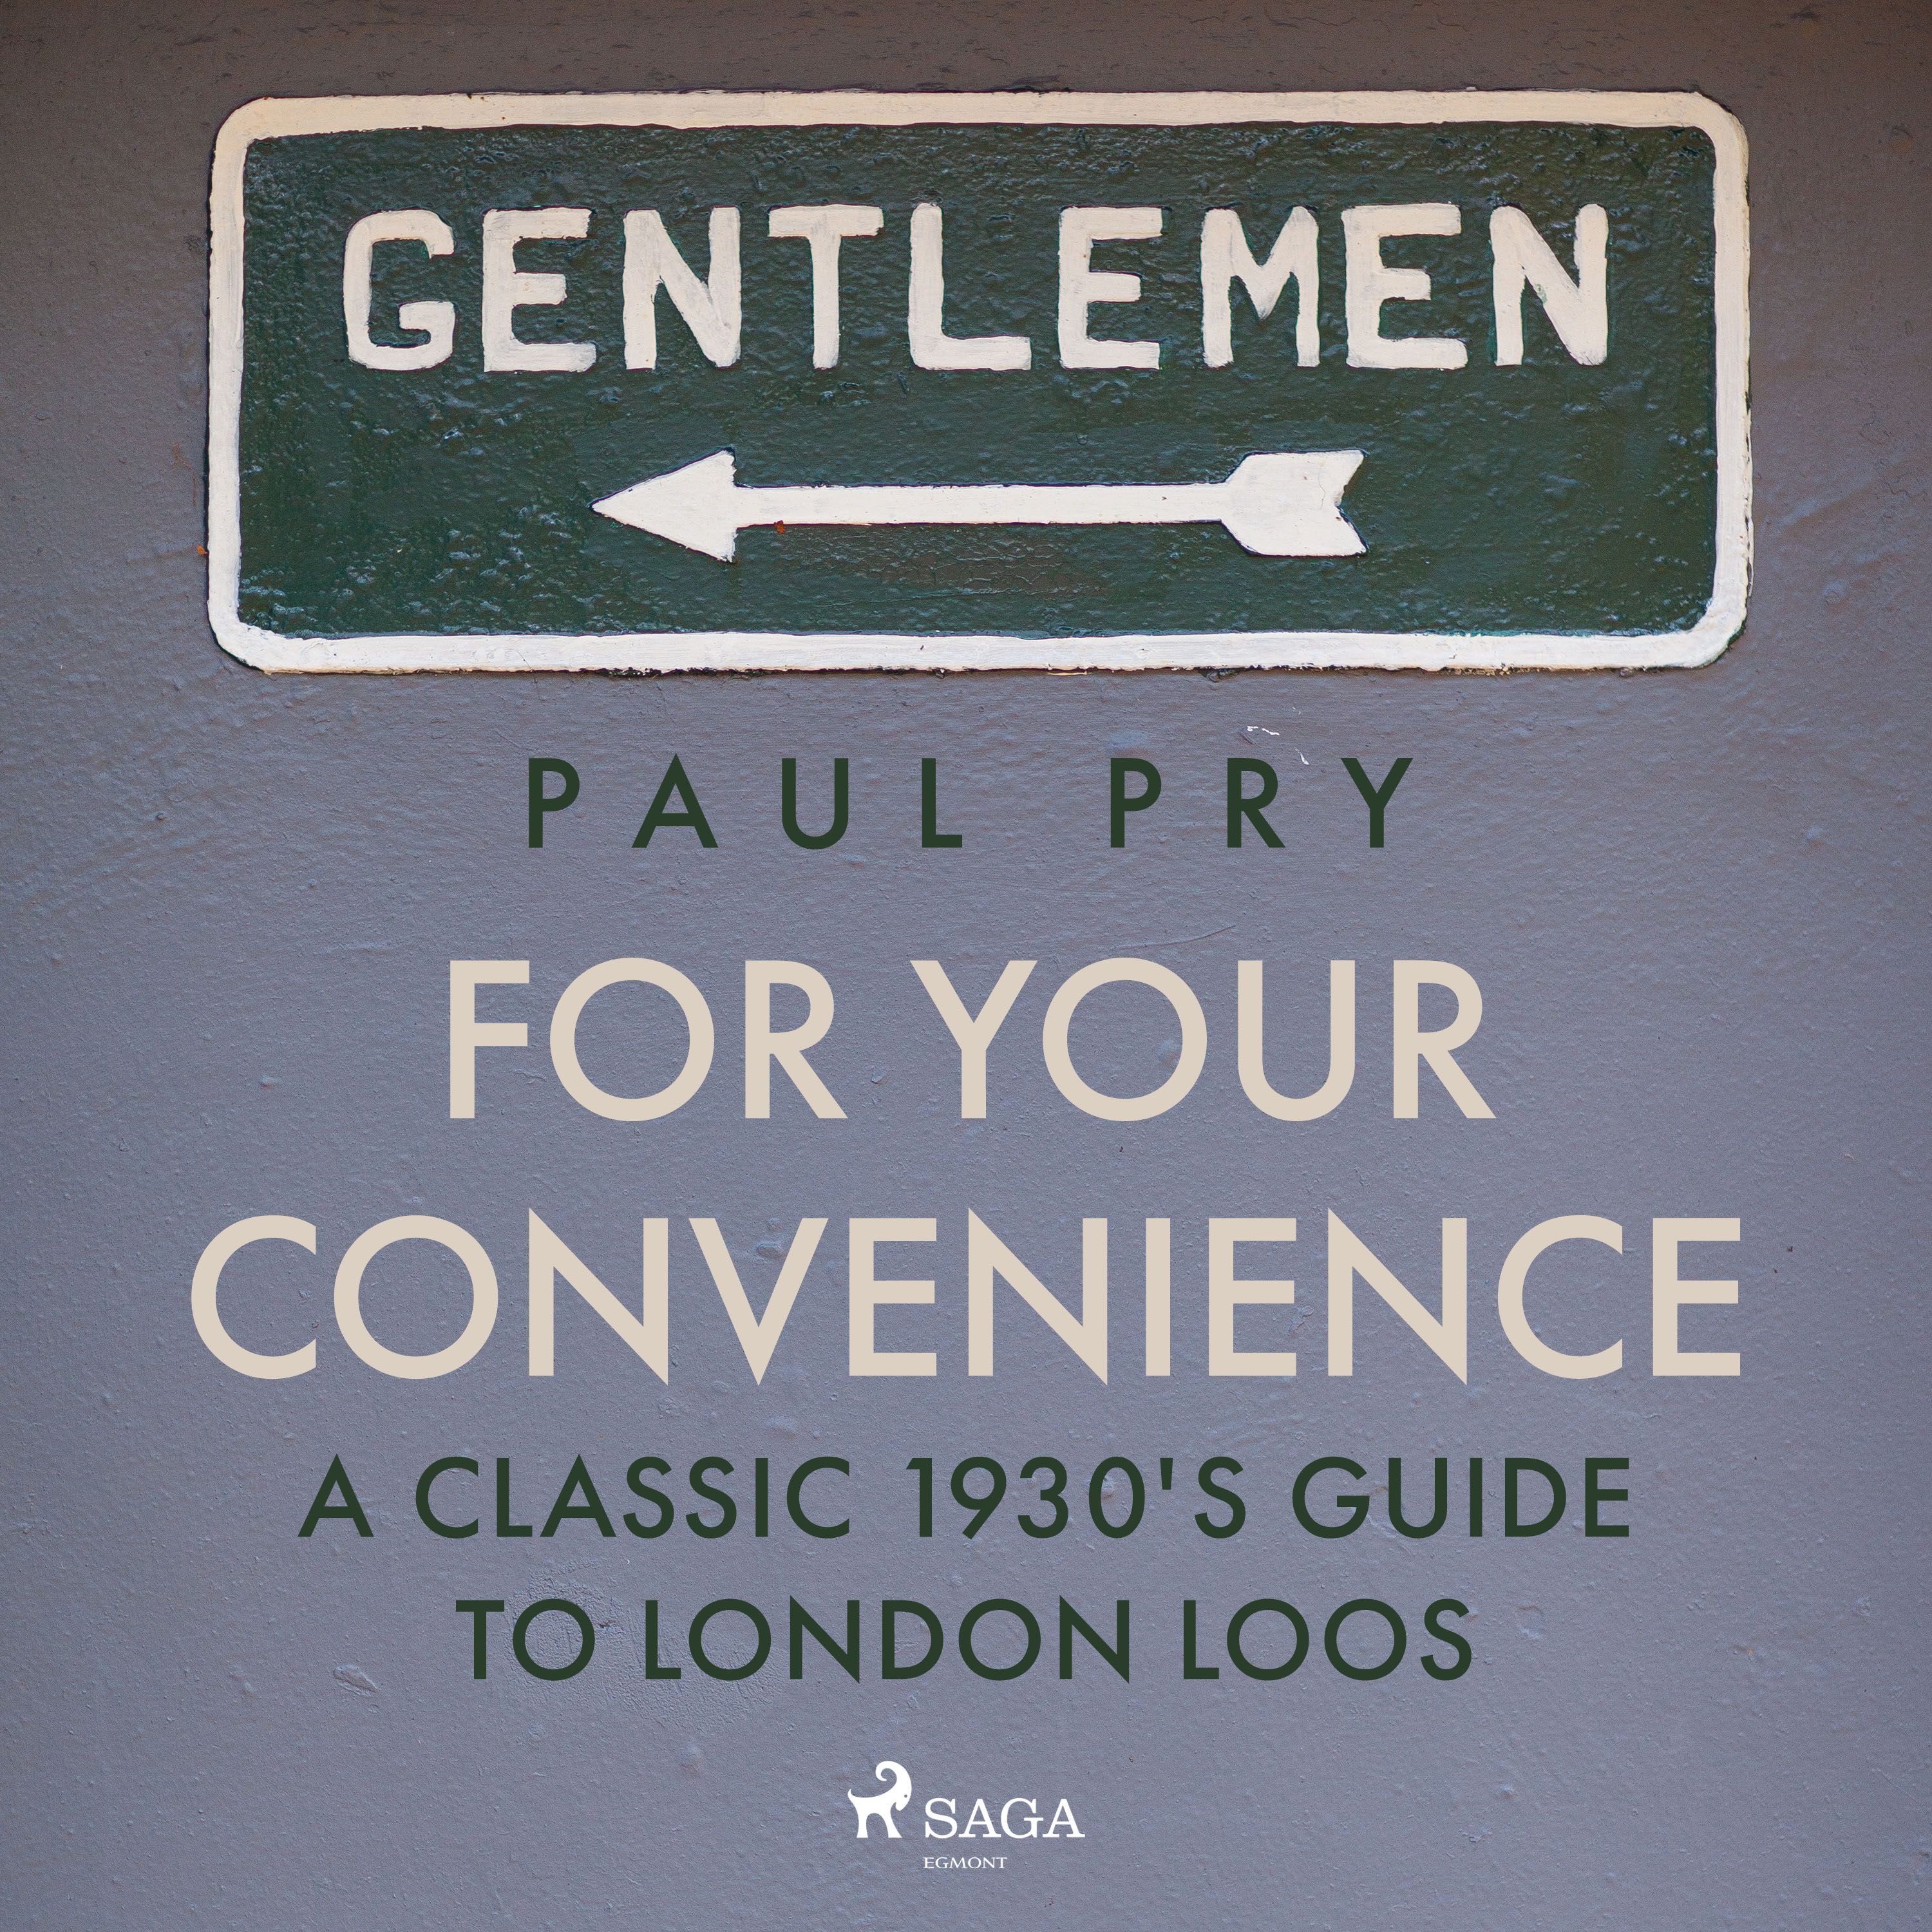 For Your Convenience - A CLASSIC 1930'S GUIDE TO LONDON LOOS, lydbog af Paul Pry